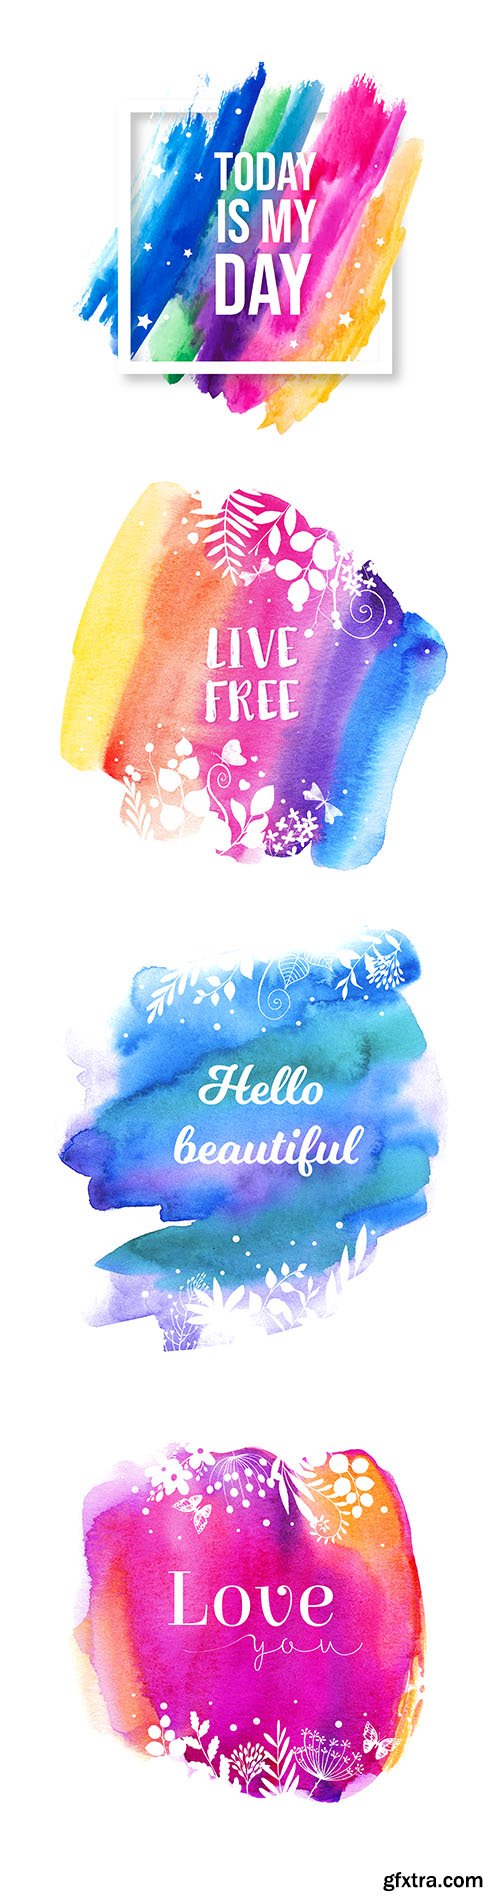 Watercolor Splash with Floral Decorations